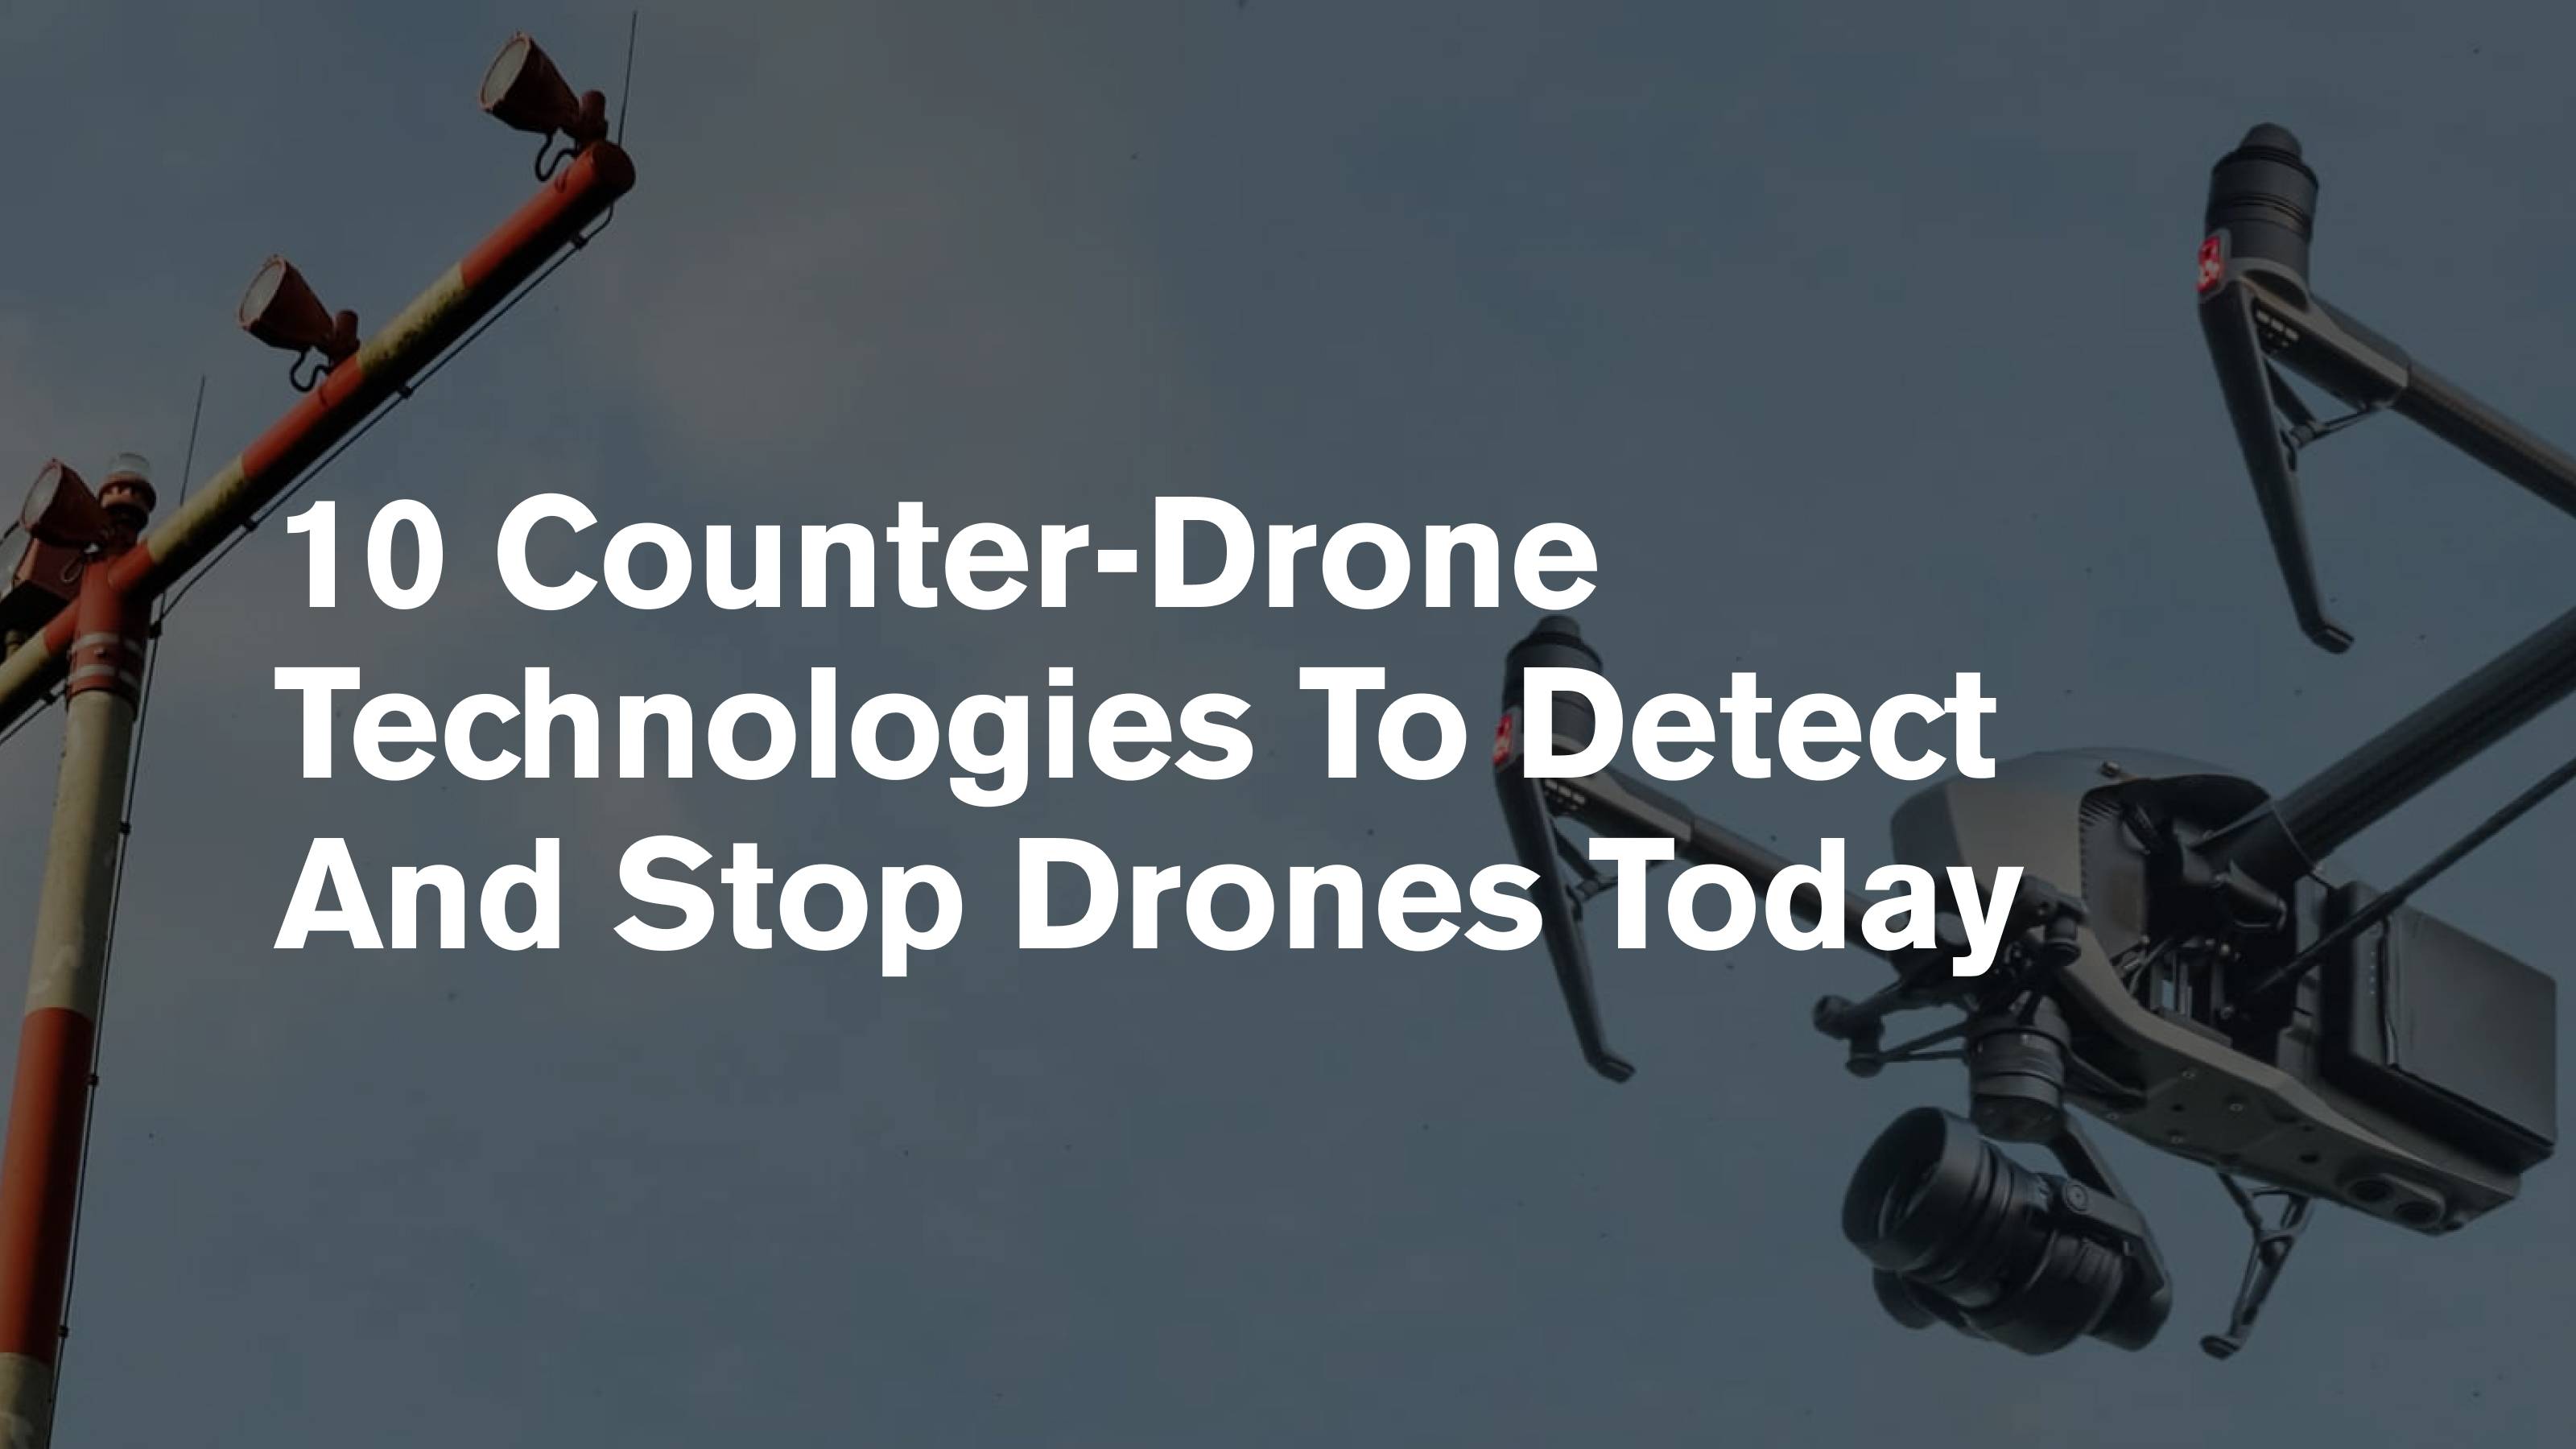 10 Types of Counter-drone Technology to Detect and Stop Drones Today